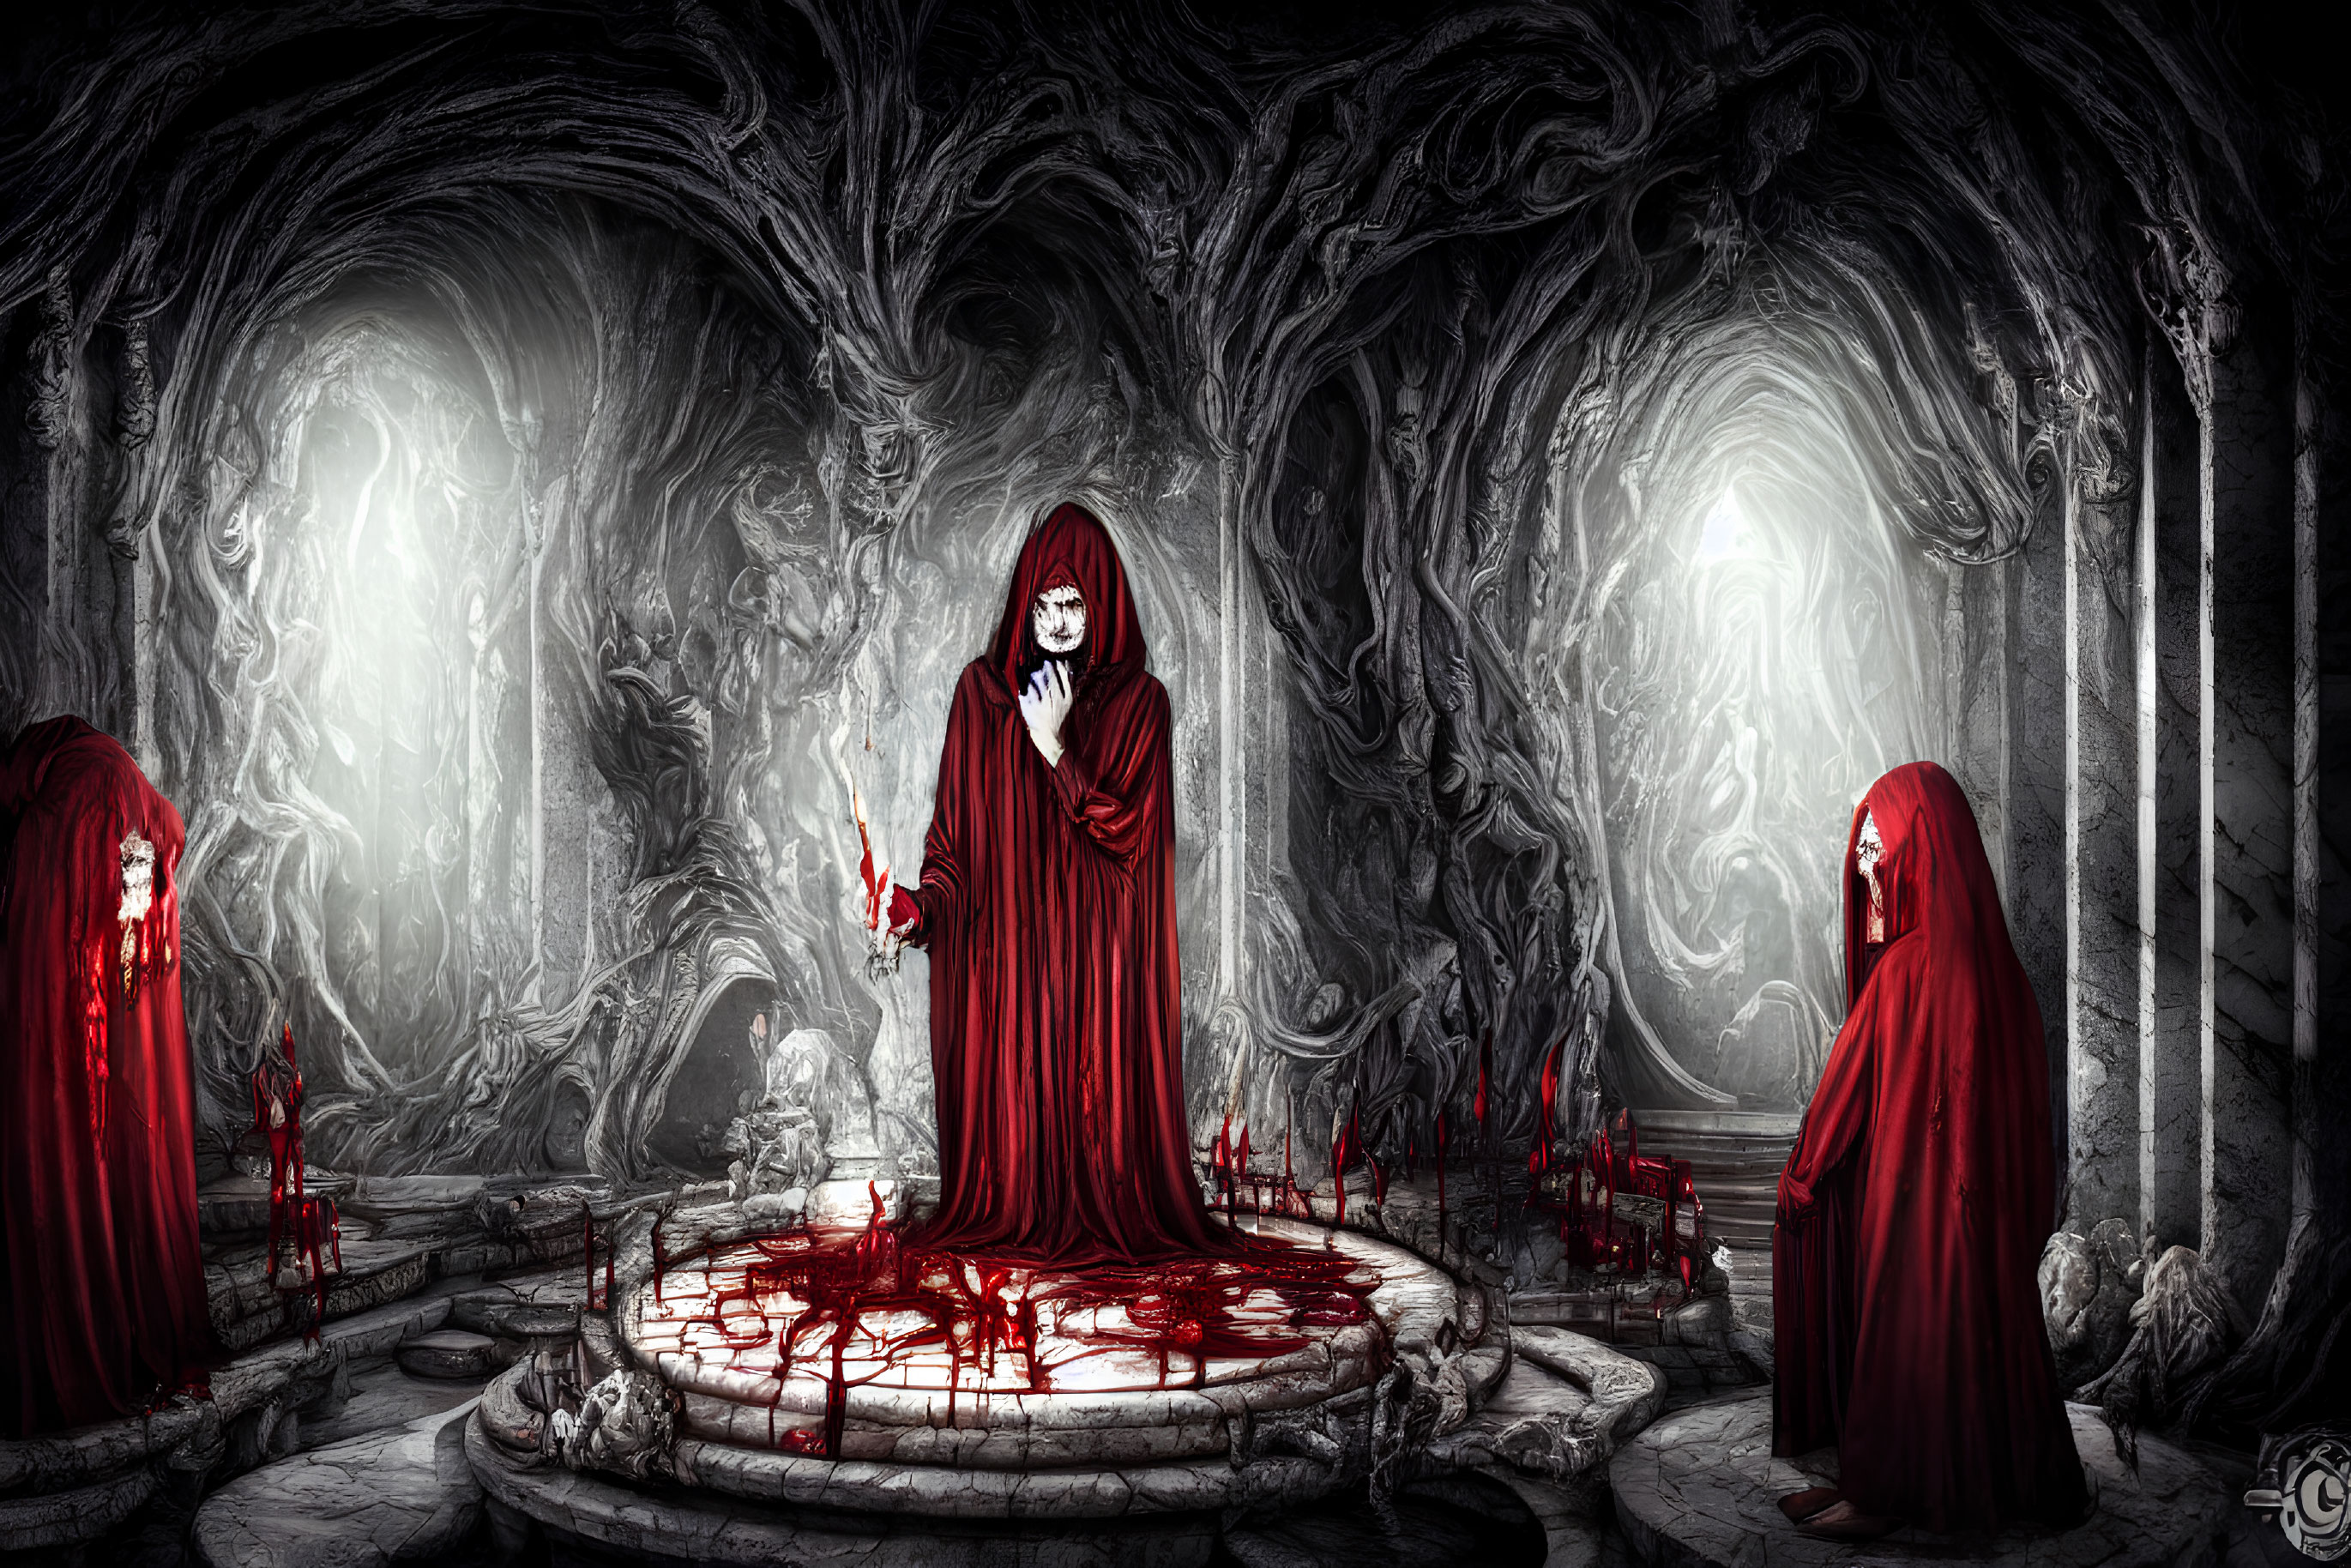 Gothic chamber with tree-like pillars and figures in red cloaks on ritual circle.